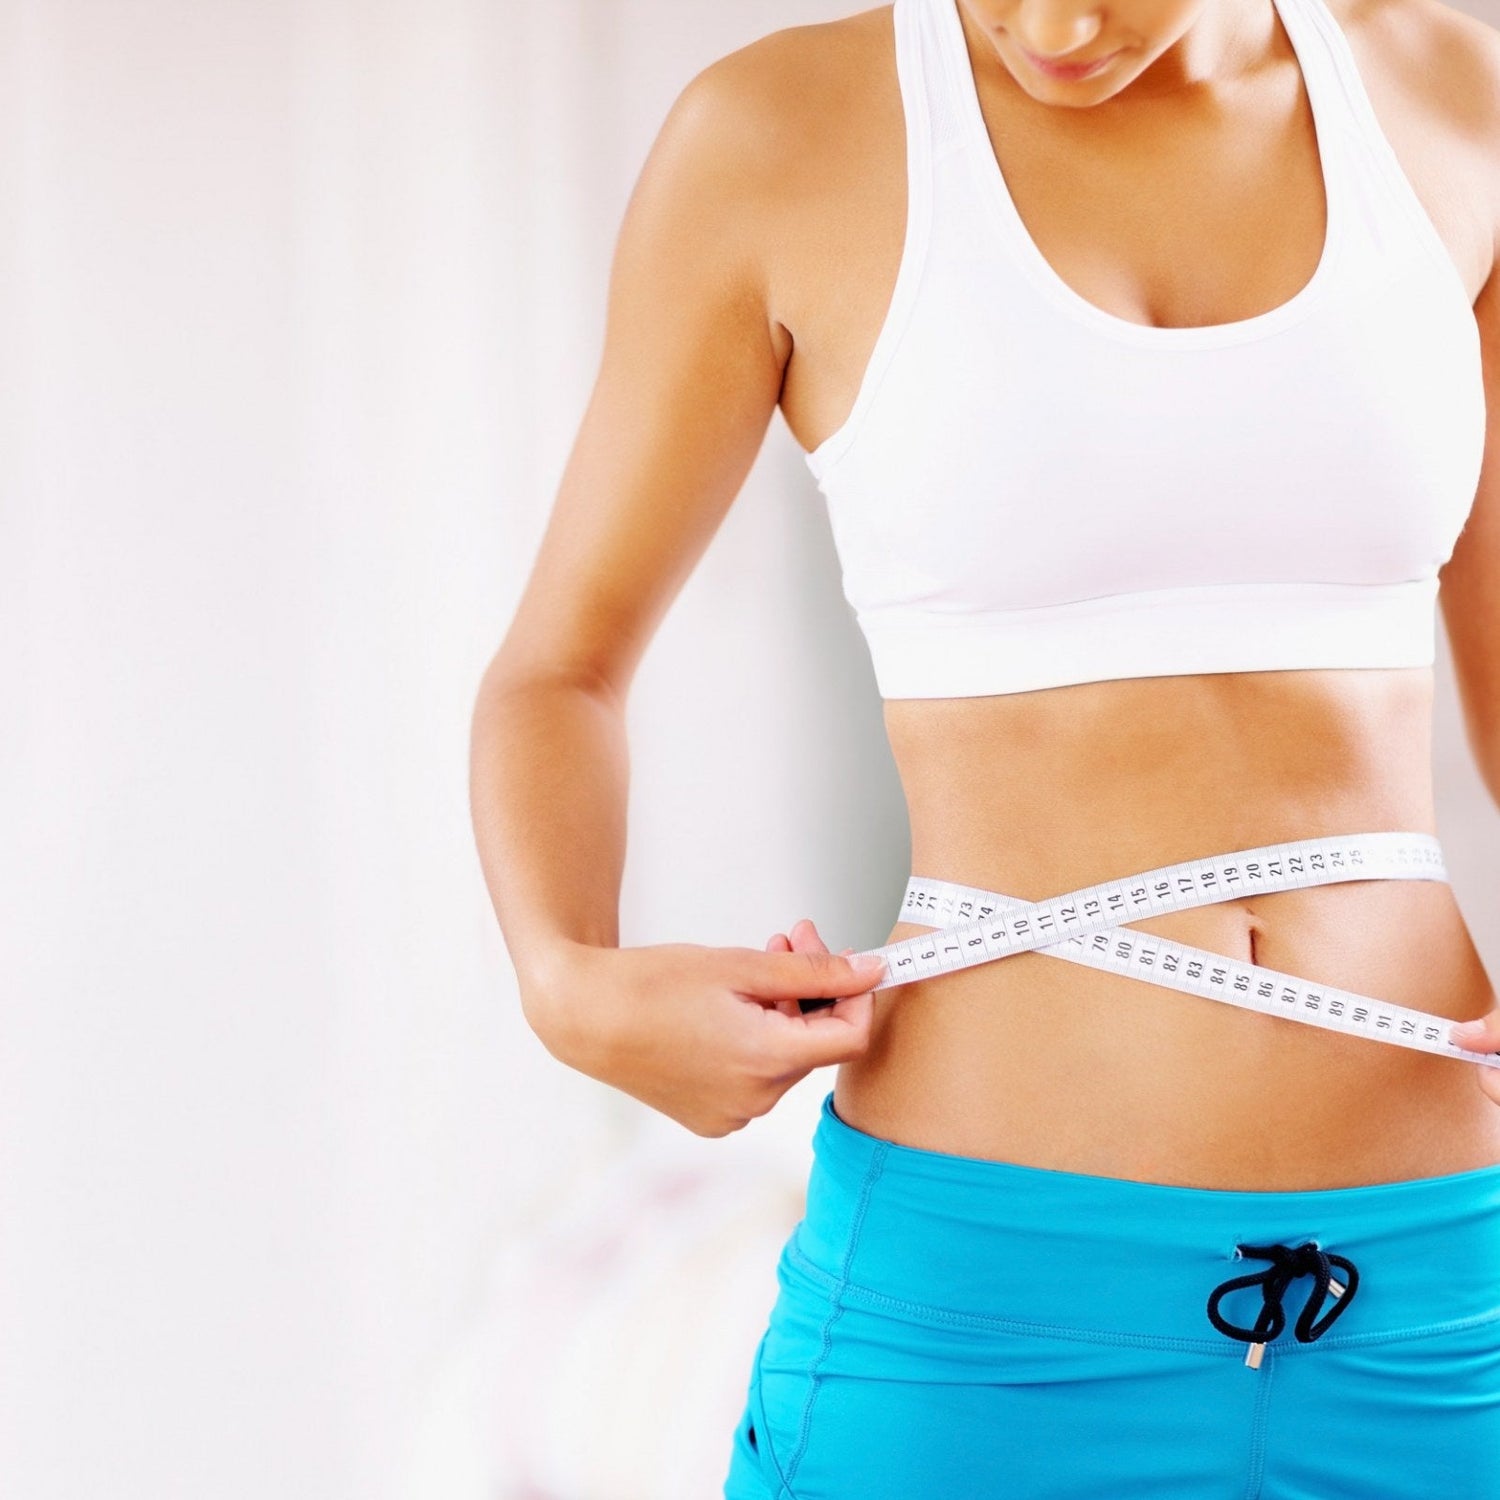 Ready to Transform Your Body? Try these Rapid Weight Loss Exercises!